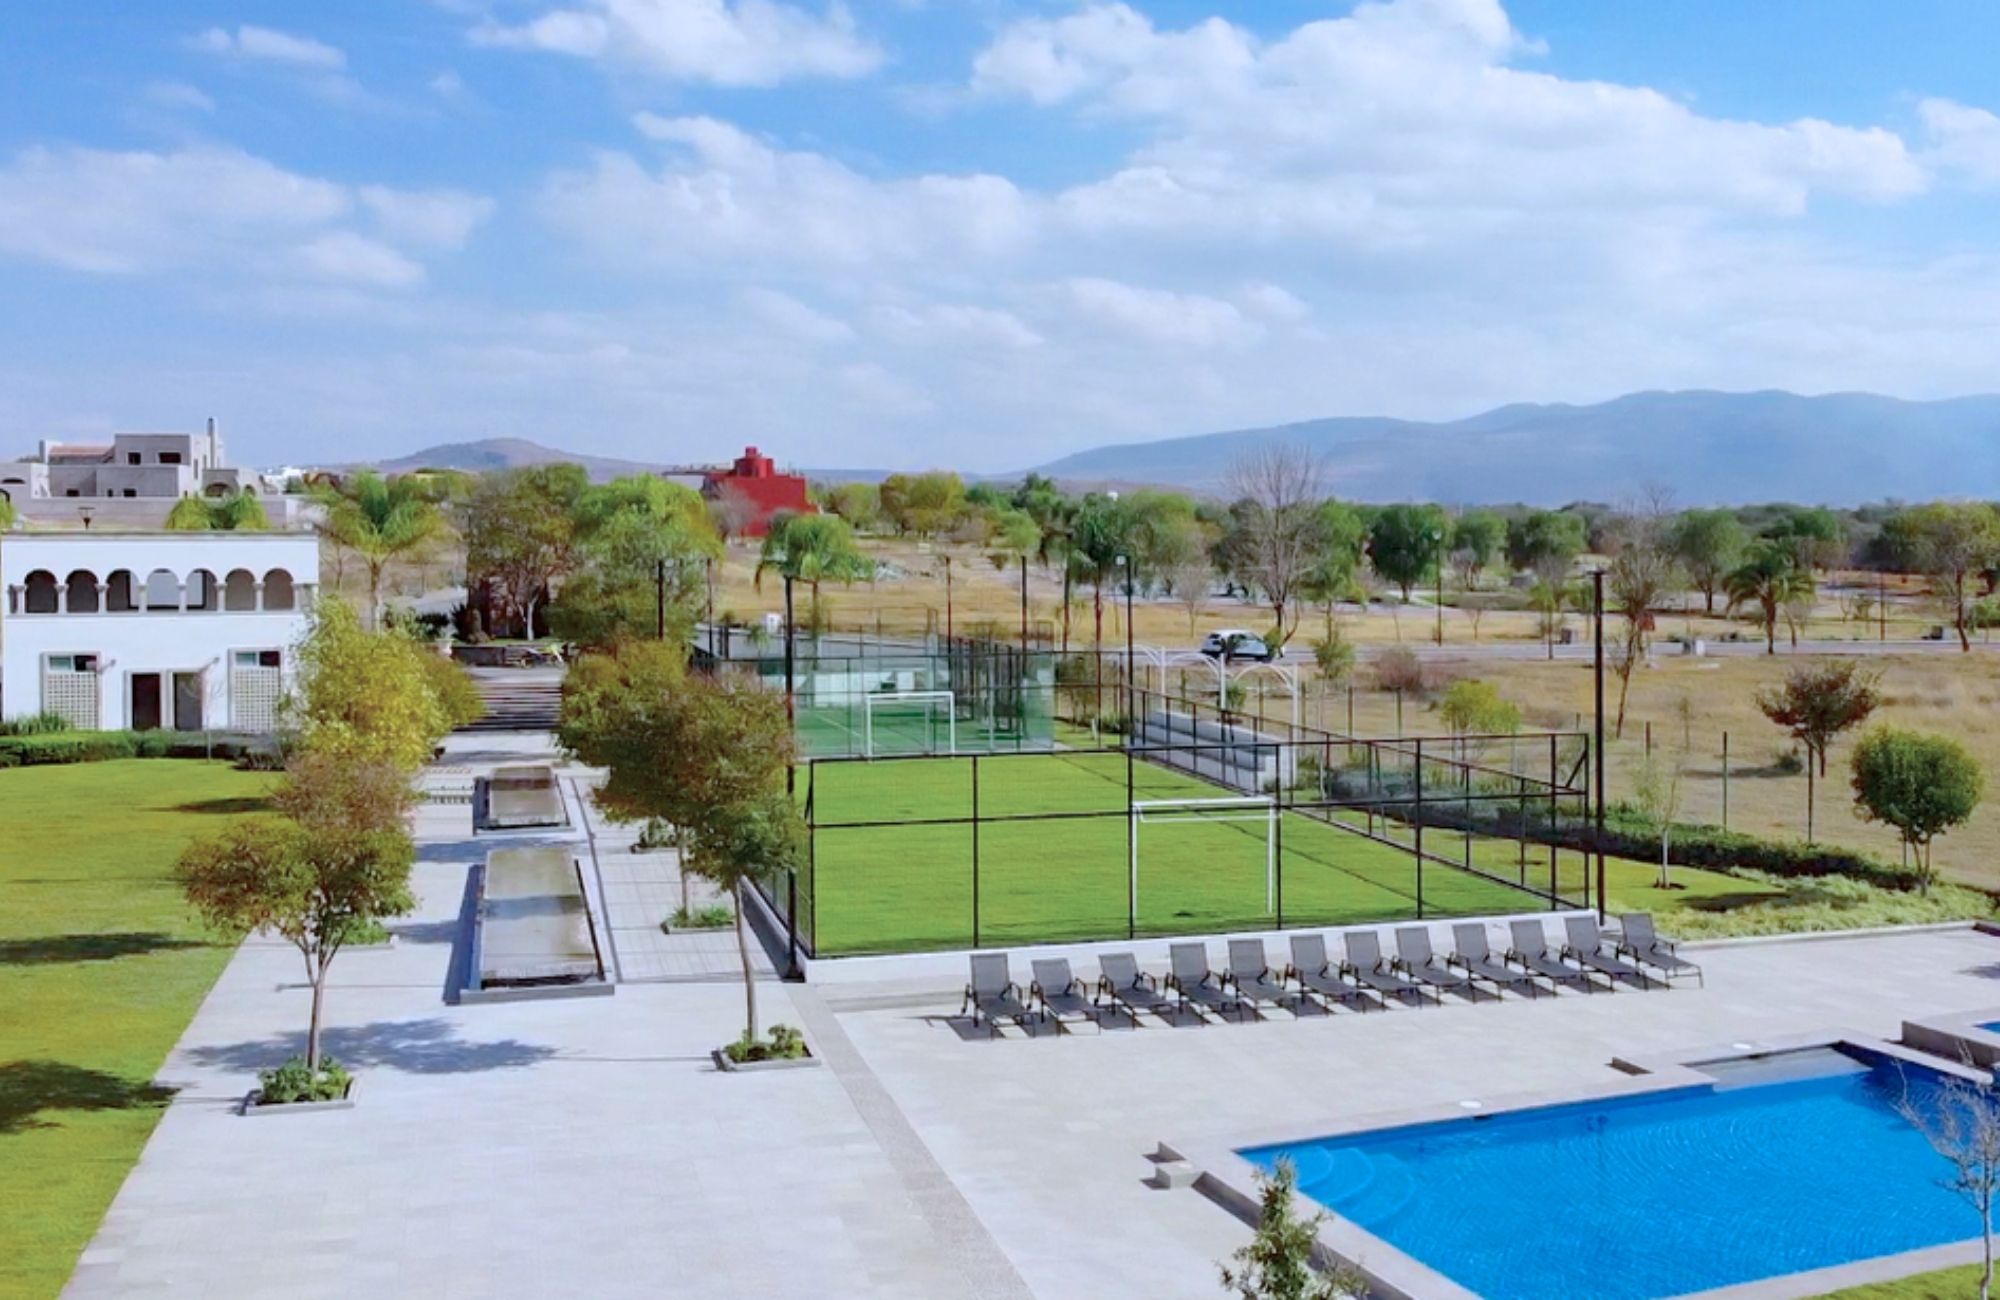 437 sqm residential lot with clubhouse, for sale in San Miguel de Allende.